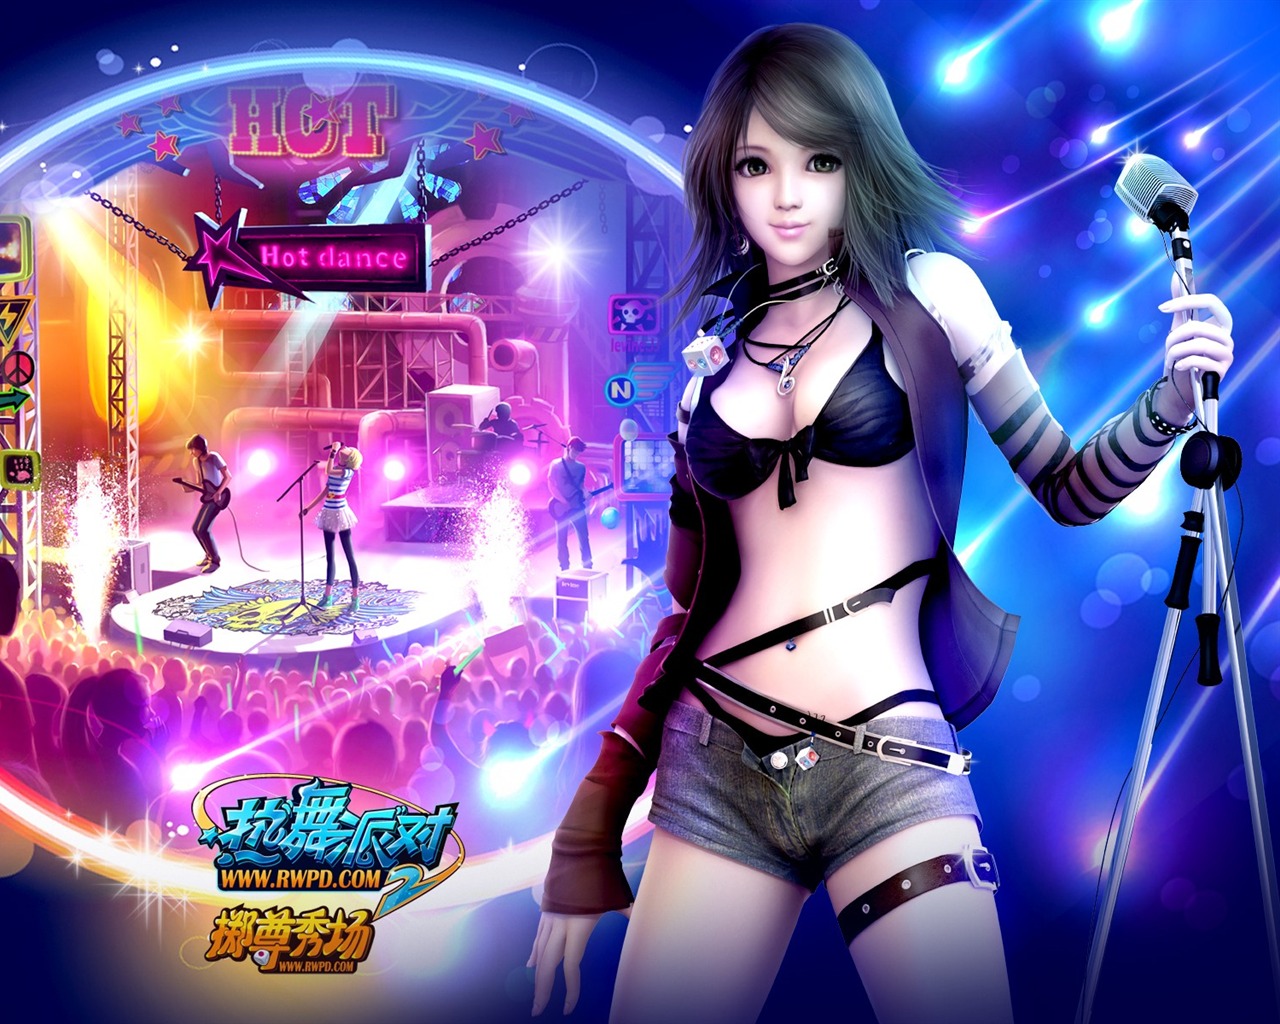 Online game Hot Dance Party II official wallpapers #37 - 1280x1024